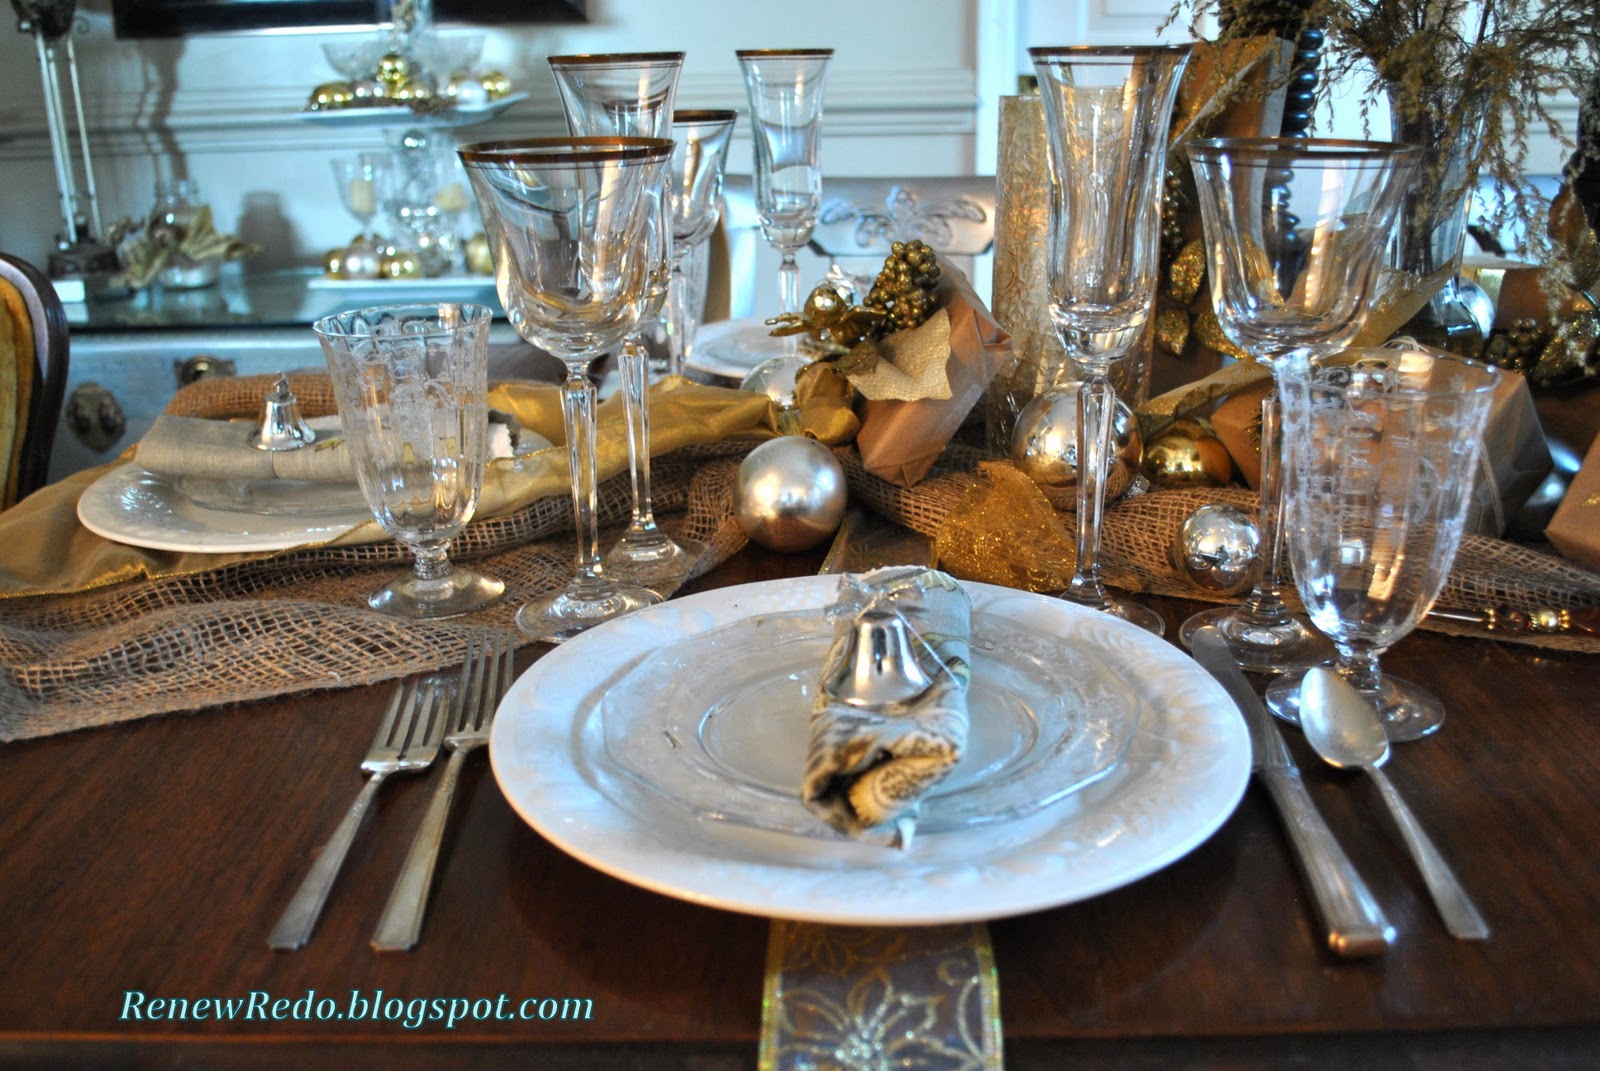 ReNew ReDo!: Washing Burlap And Putting It On The Table